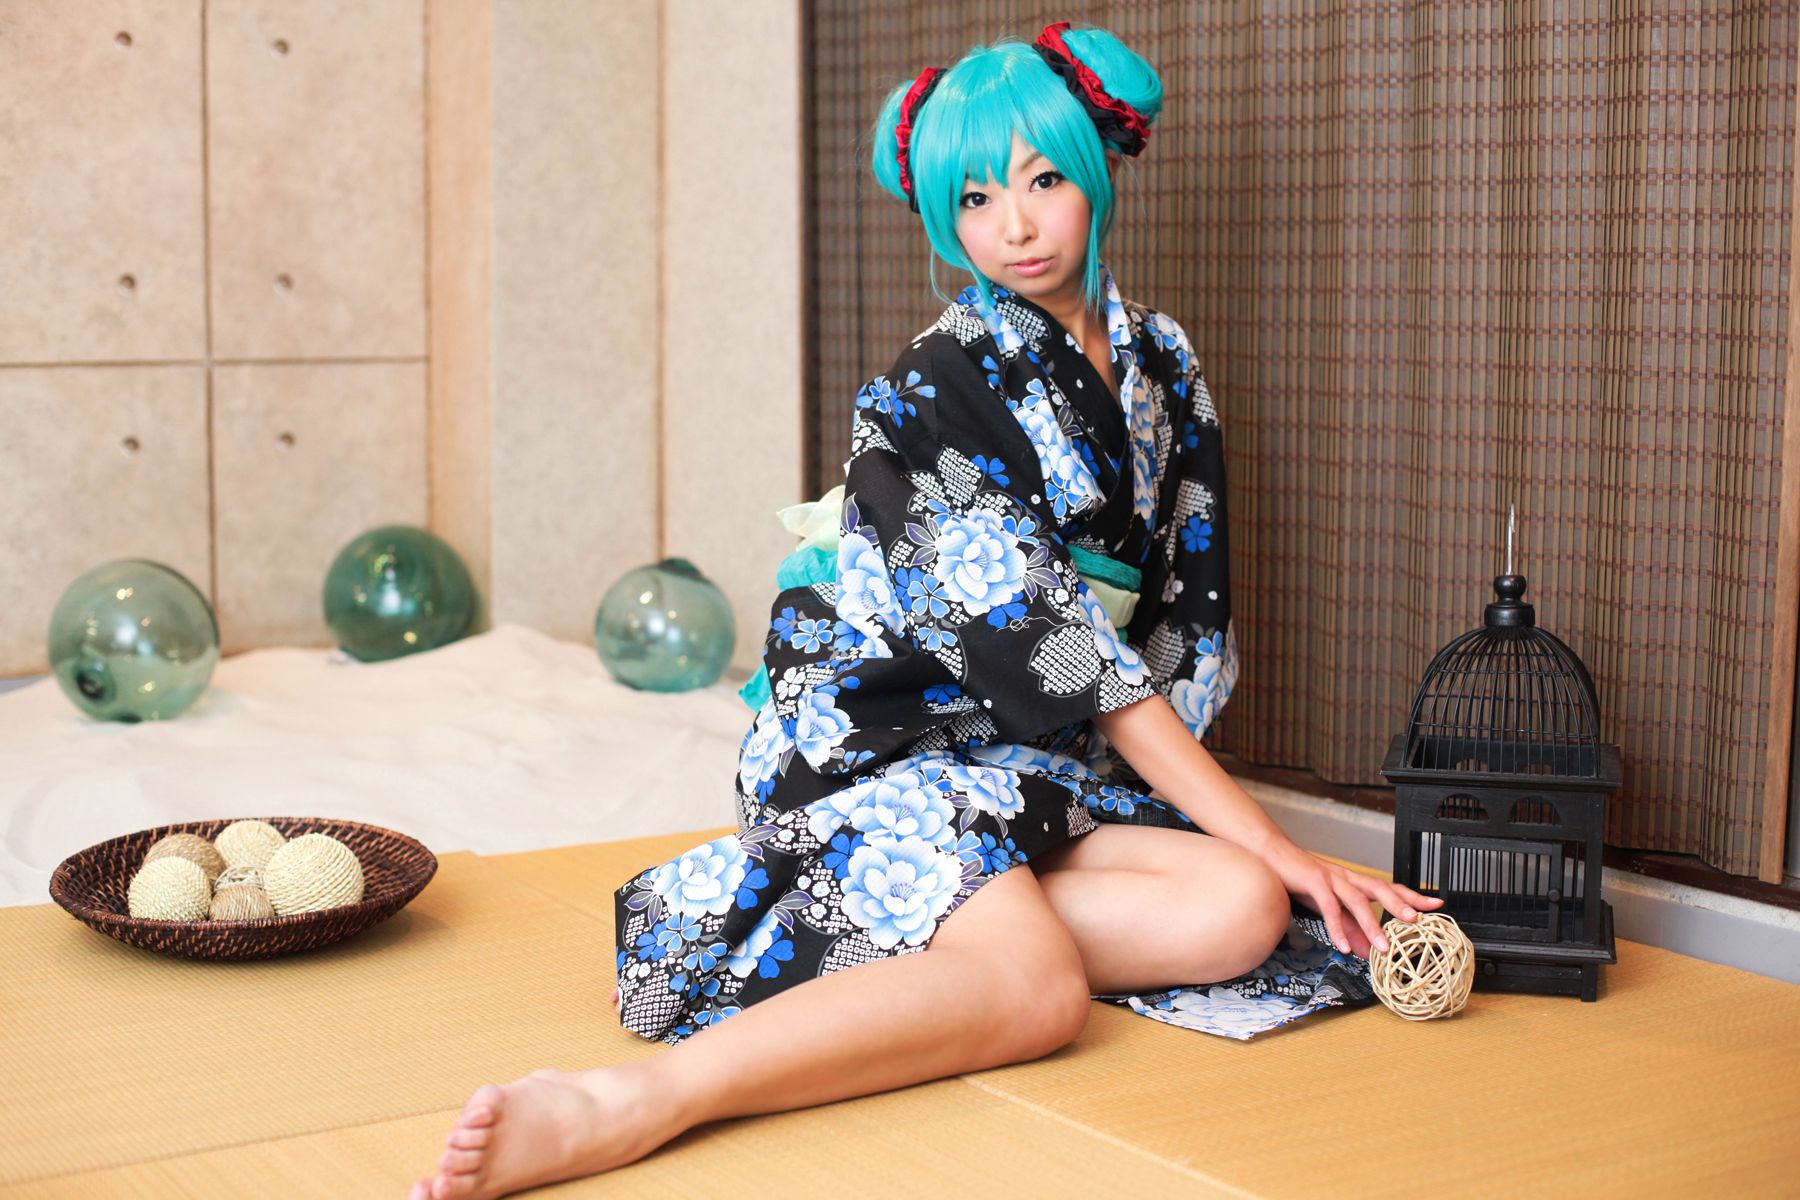 taotuhome[Cosplay] Necoco as Hatsune Miku from Vocaloid 套图第94张